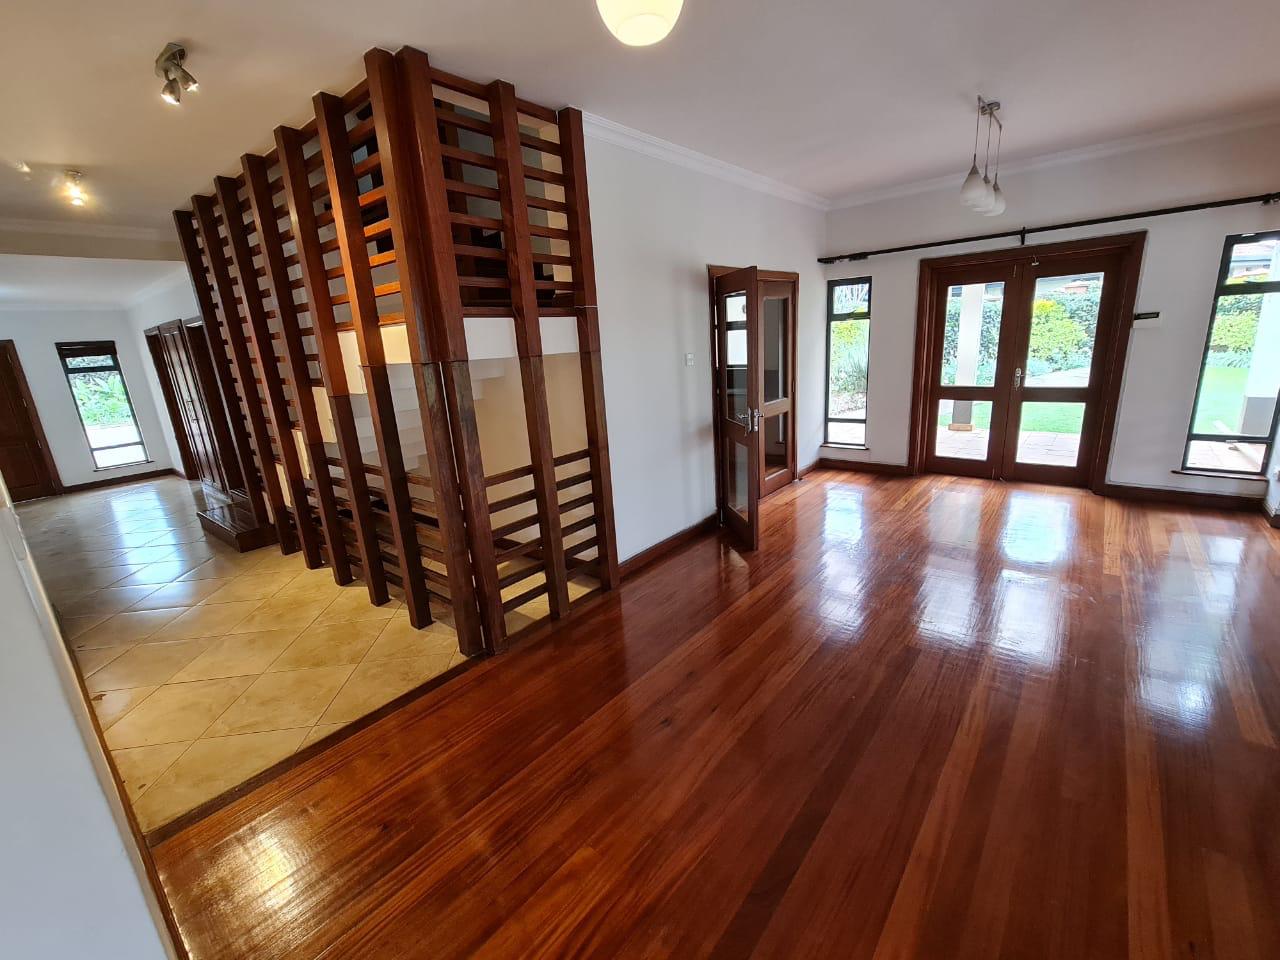 Lovely 4 bedroom Townhouse plus dsq for rent at Ksh330k in Westlands, ensuite, family room, office, detached dsq for 2, very well maintained and more amenities14